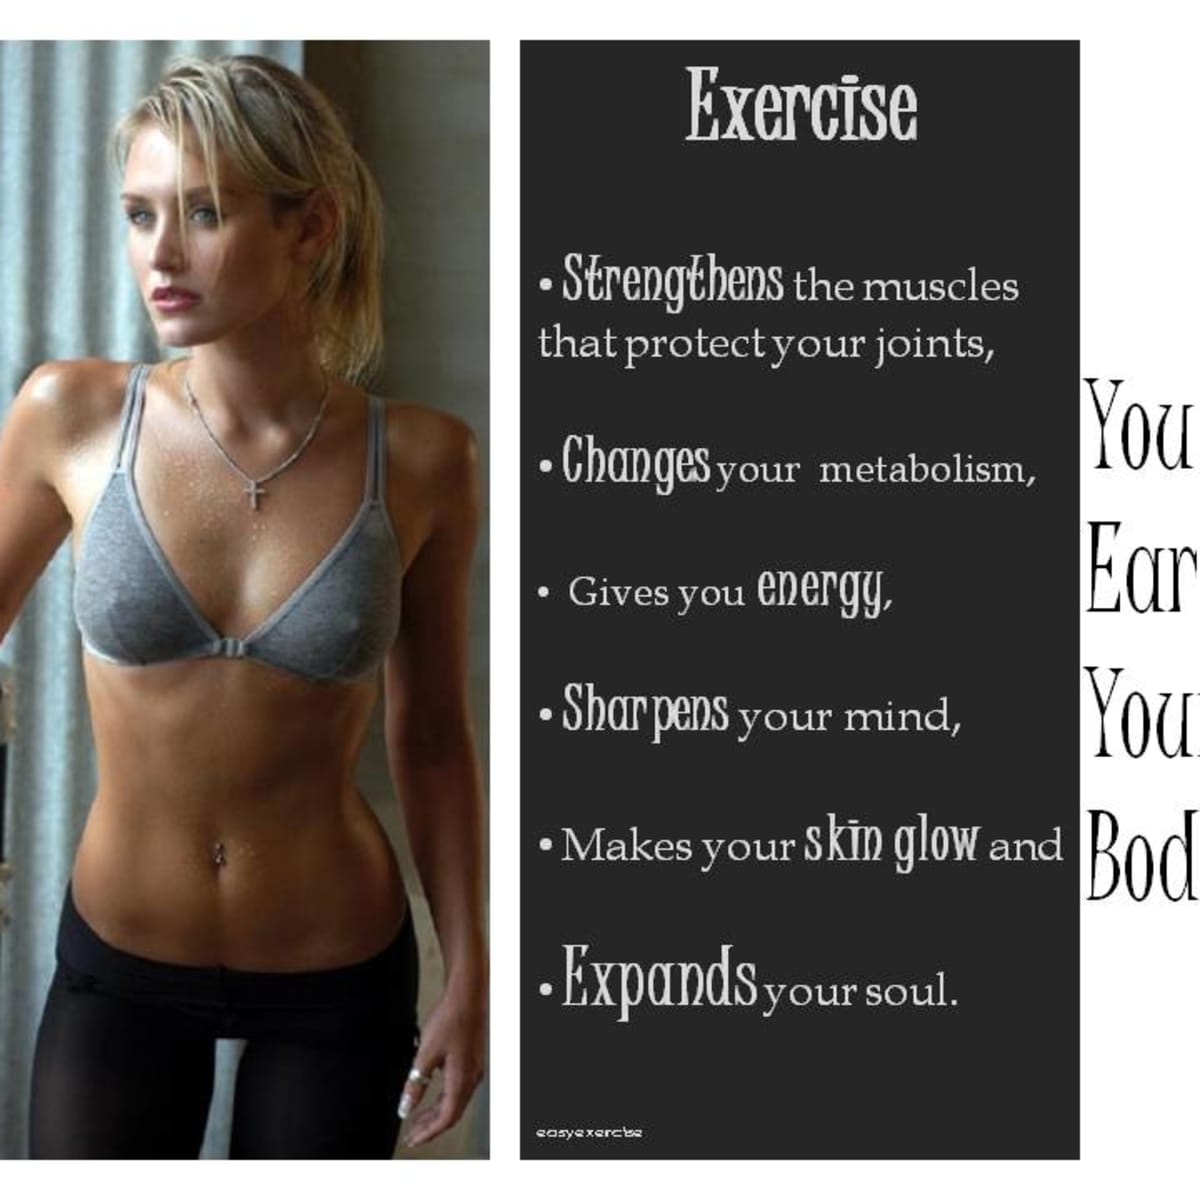 Motivational Fitness Posters for Home or Gym - HubPages